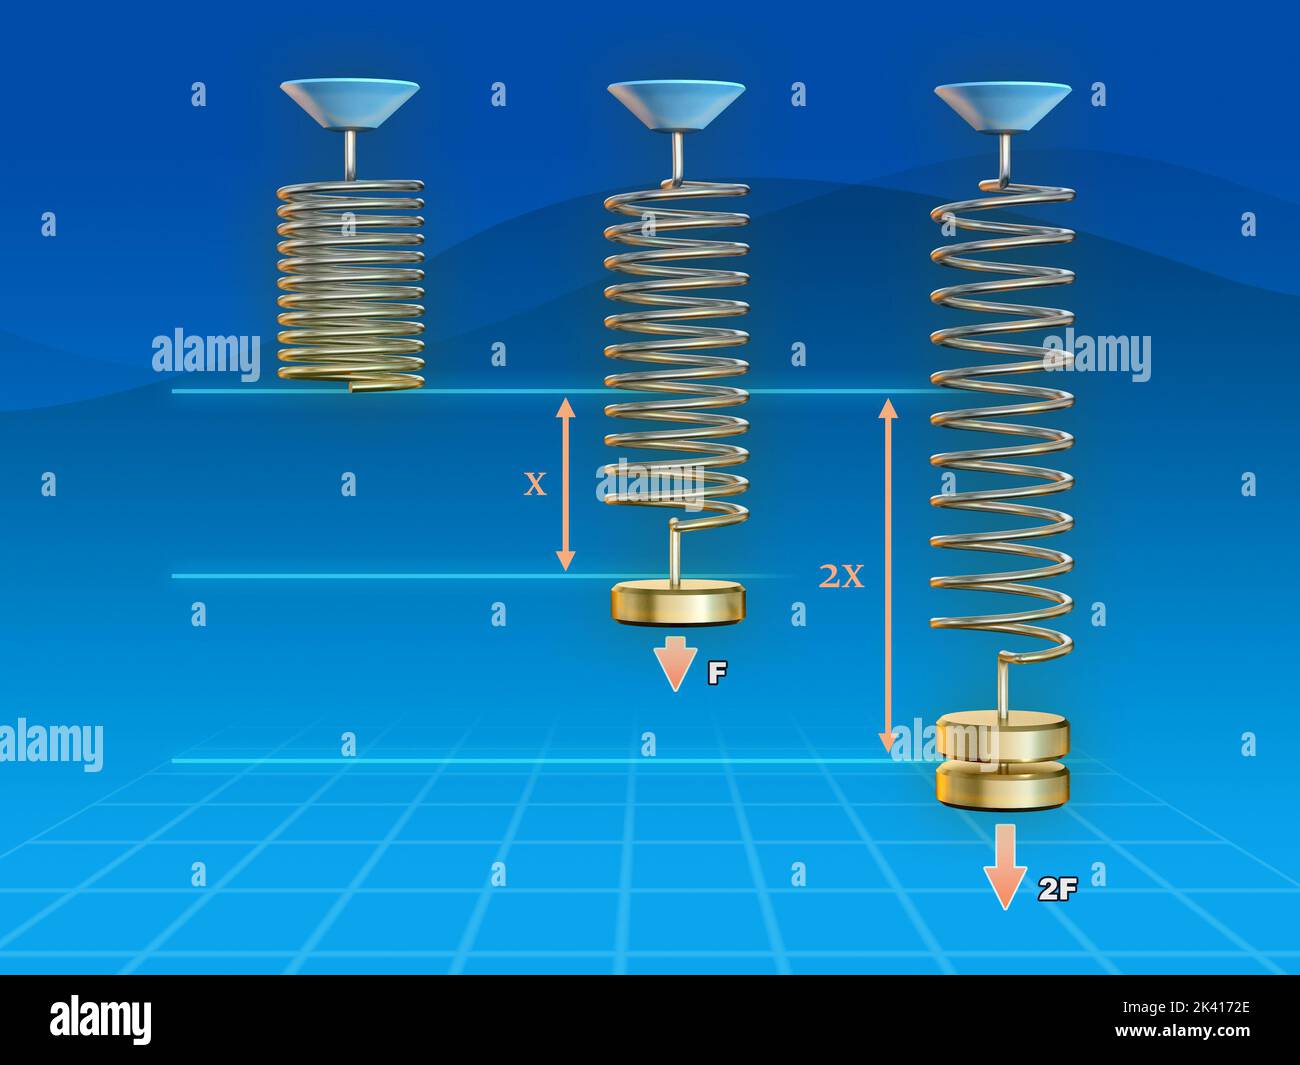 Mechanical properties of springs according to Hooke's law. Digital illustration. Stock Photo